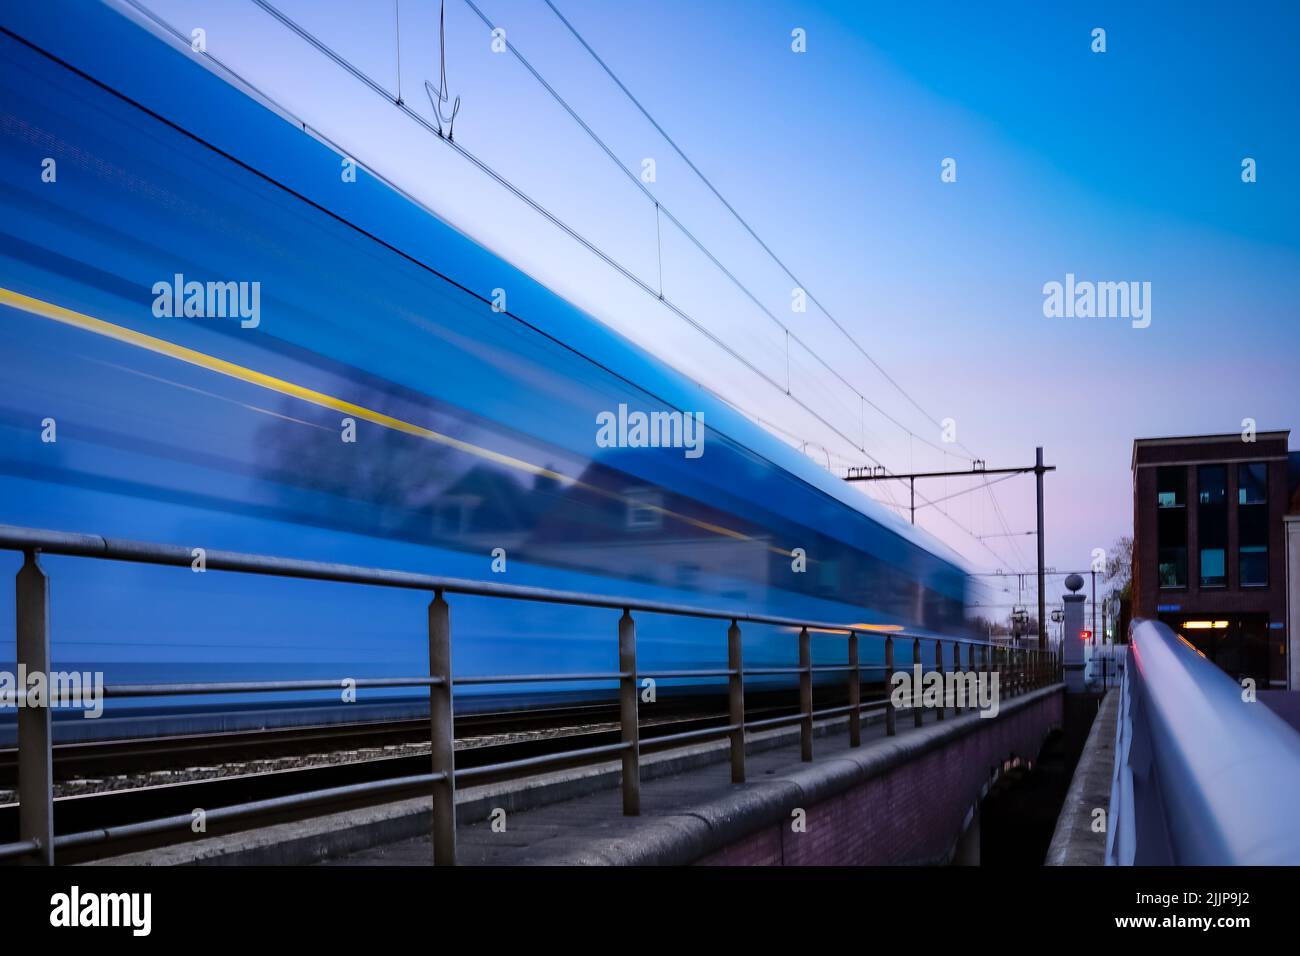 A train in motion at sunset or sunrise in Amersfoort, the Netherlands Stock Photo